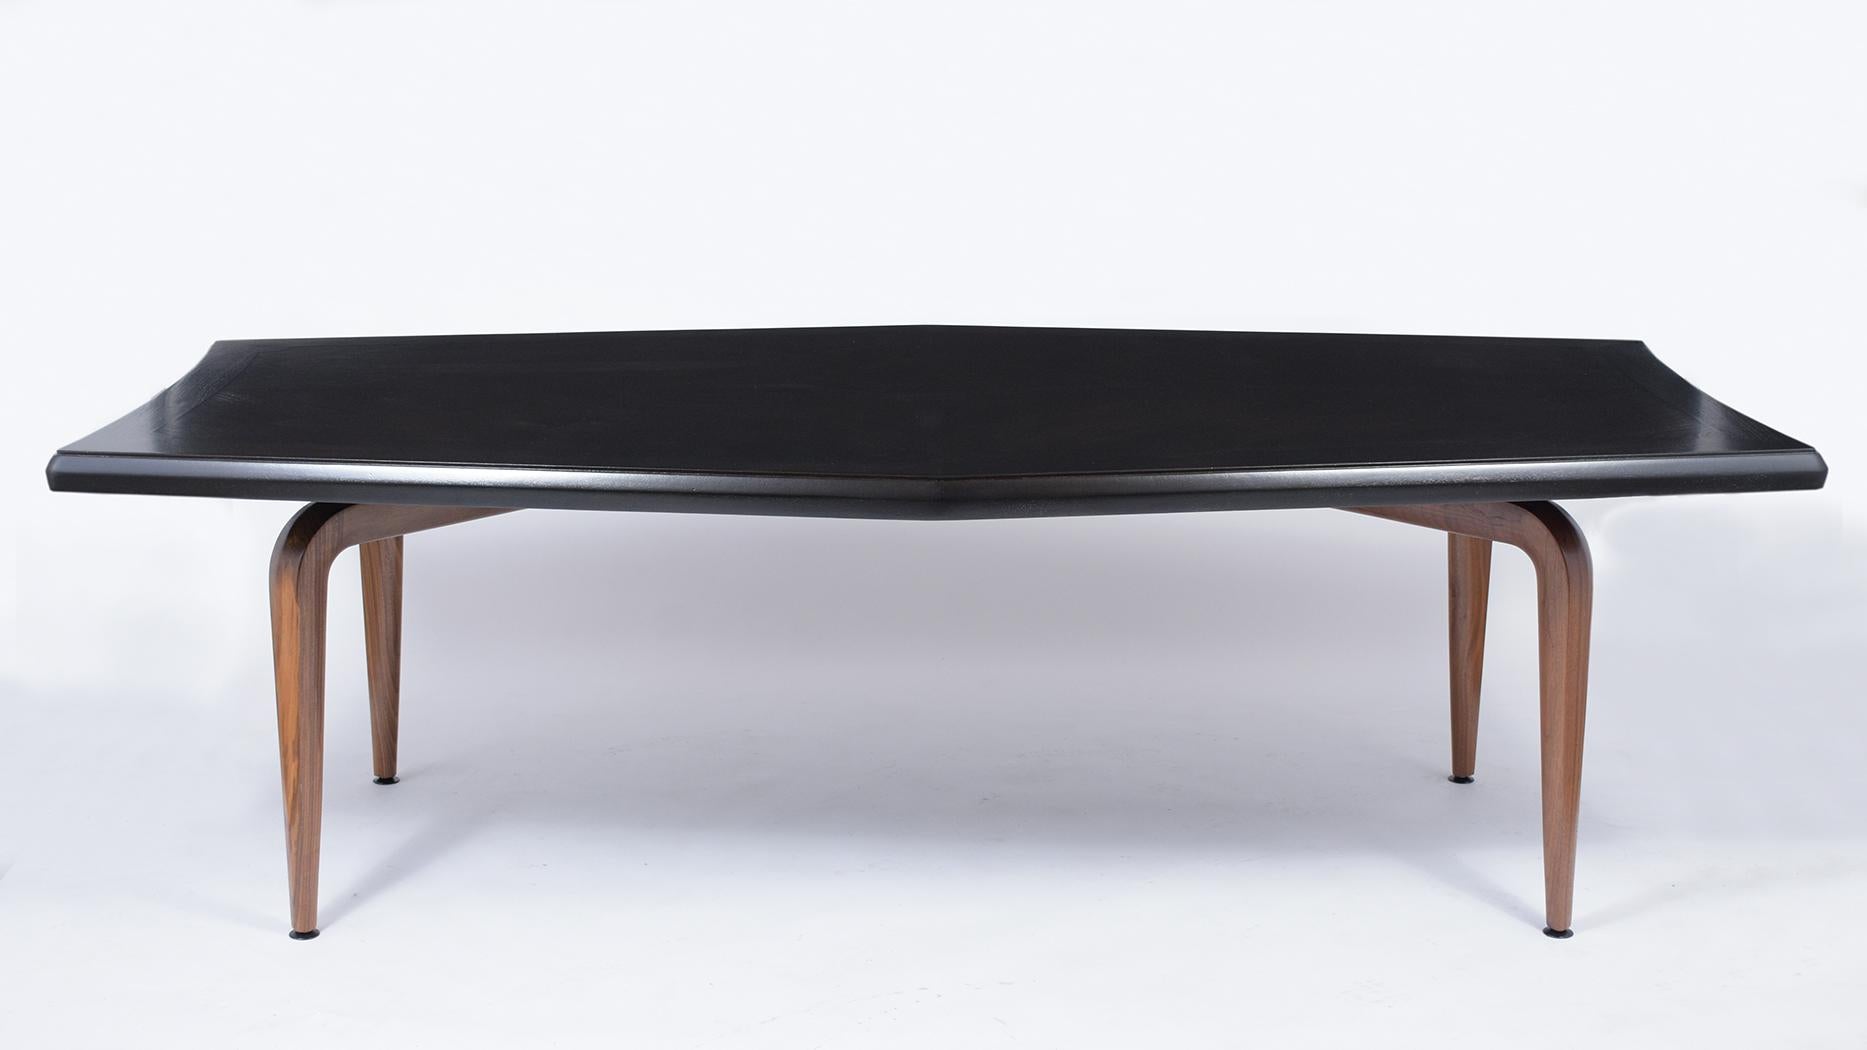 An extraordinary mid-century modern Monteverdi-Young dining table hand-crafted out of walnut wood is finished in a walnut and ebonized color combination with a satin lacquered finish and is fully restored. this executive writing table features a